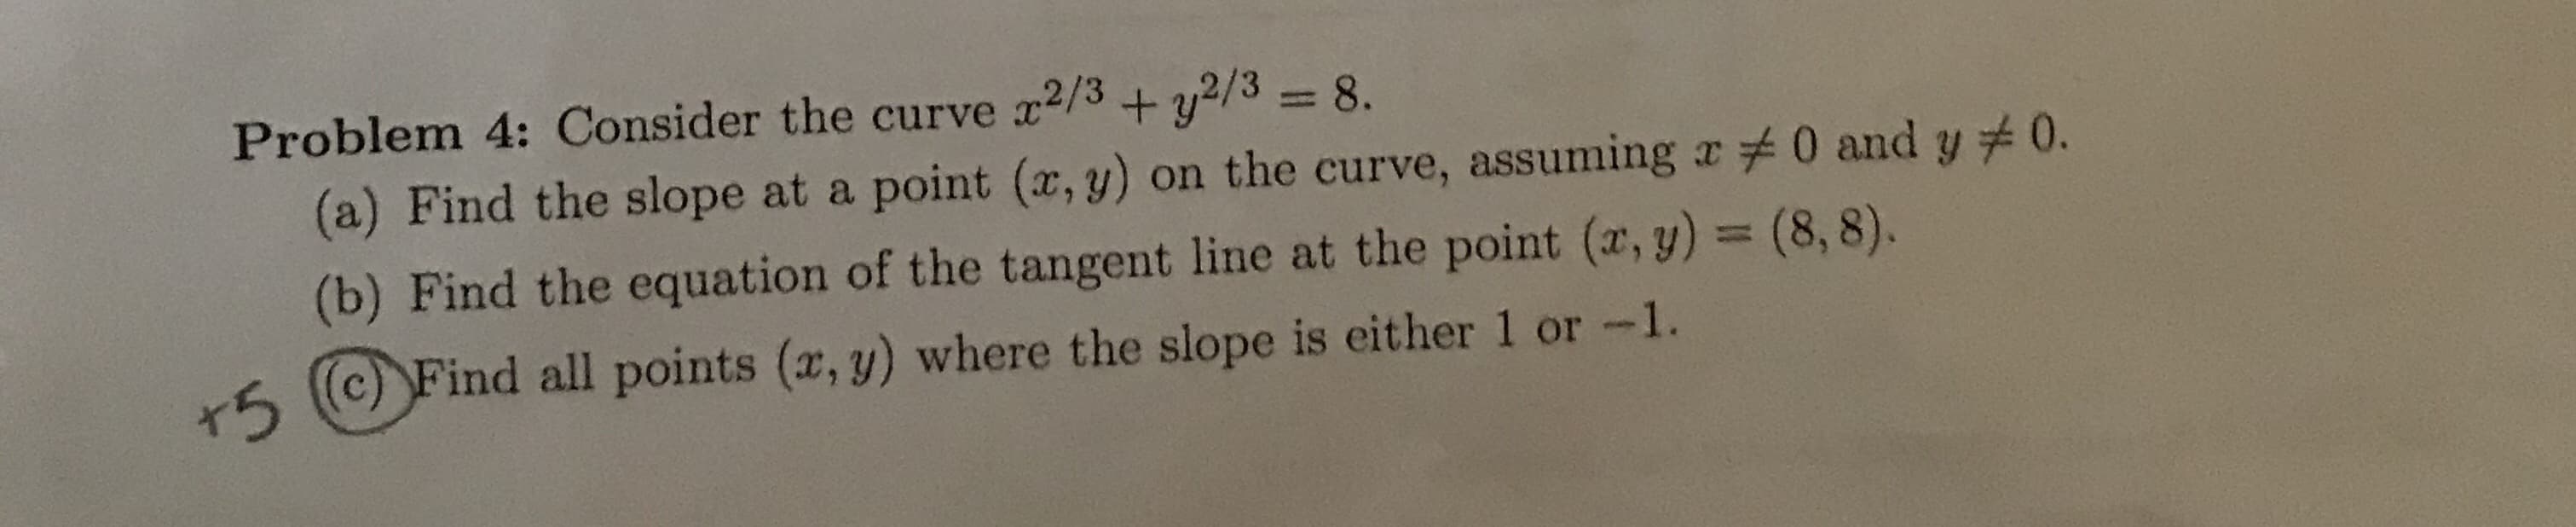 Problem 4: Consider the curve
2/3
+ y2/38.
(a) Find the slope at a point (x, y) on the curve, assuming a 0 and y
(b) Find the equation of the tangent line at the point (r, y) = (8, 8).
0.
r5
(c) Find all points (x, y) where the slope is either 1 or -1.
